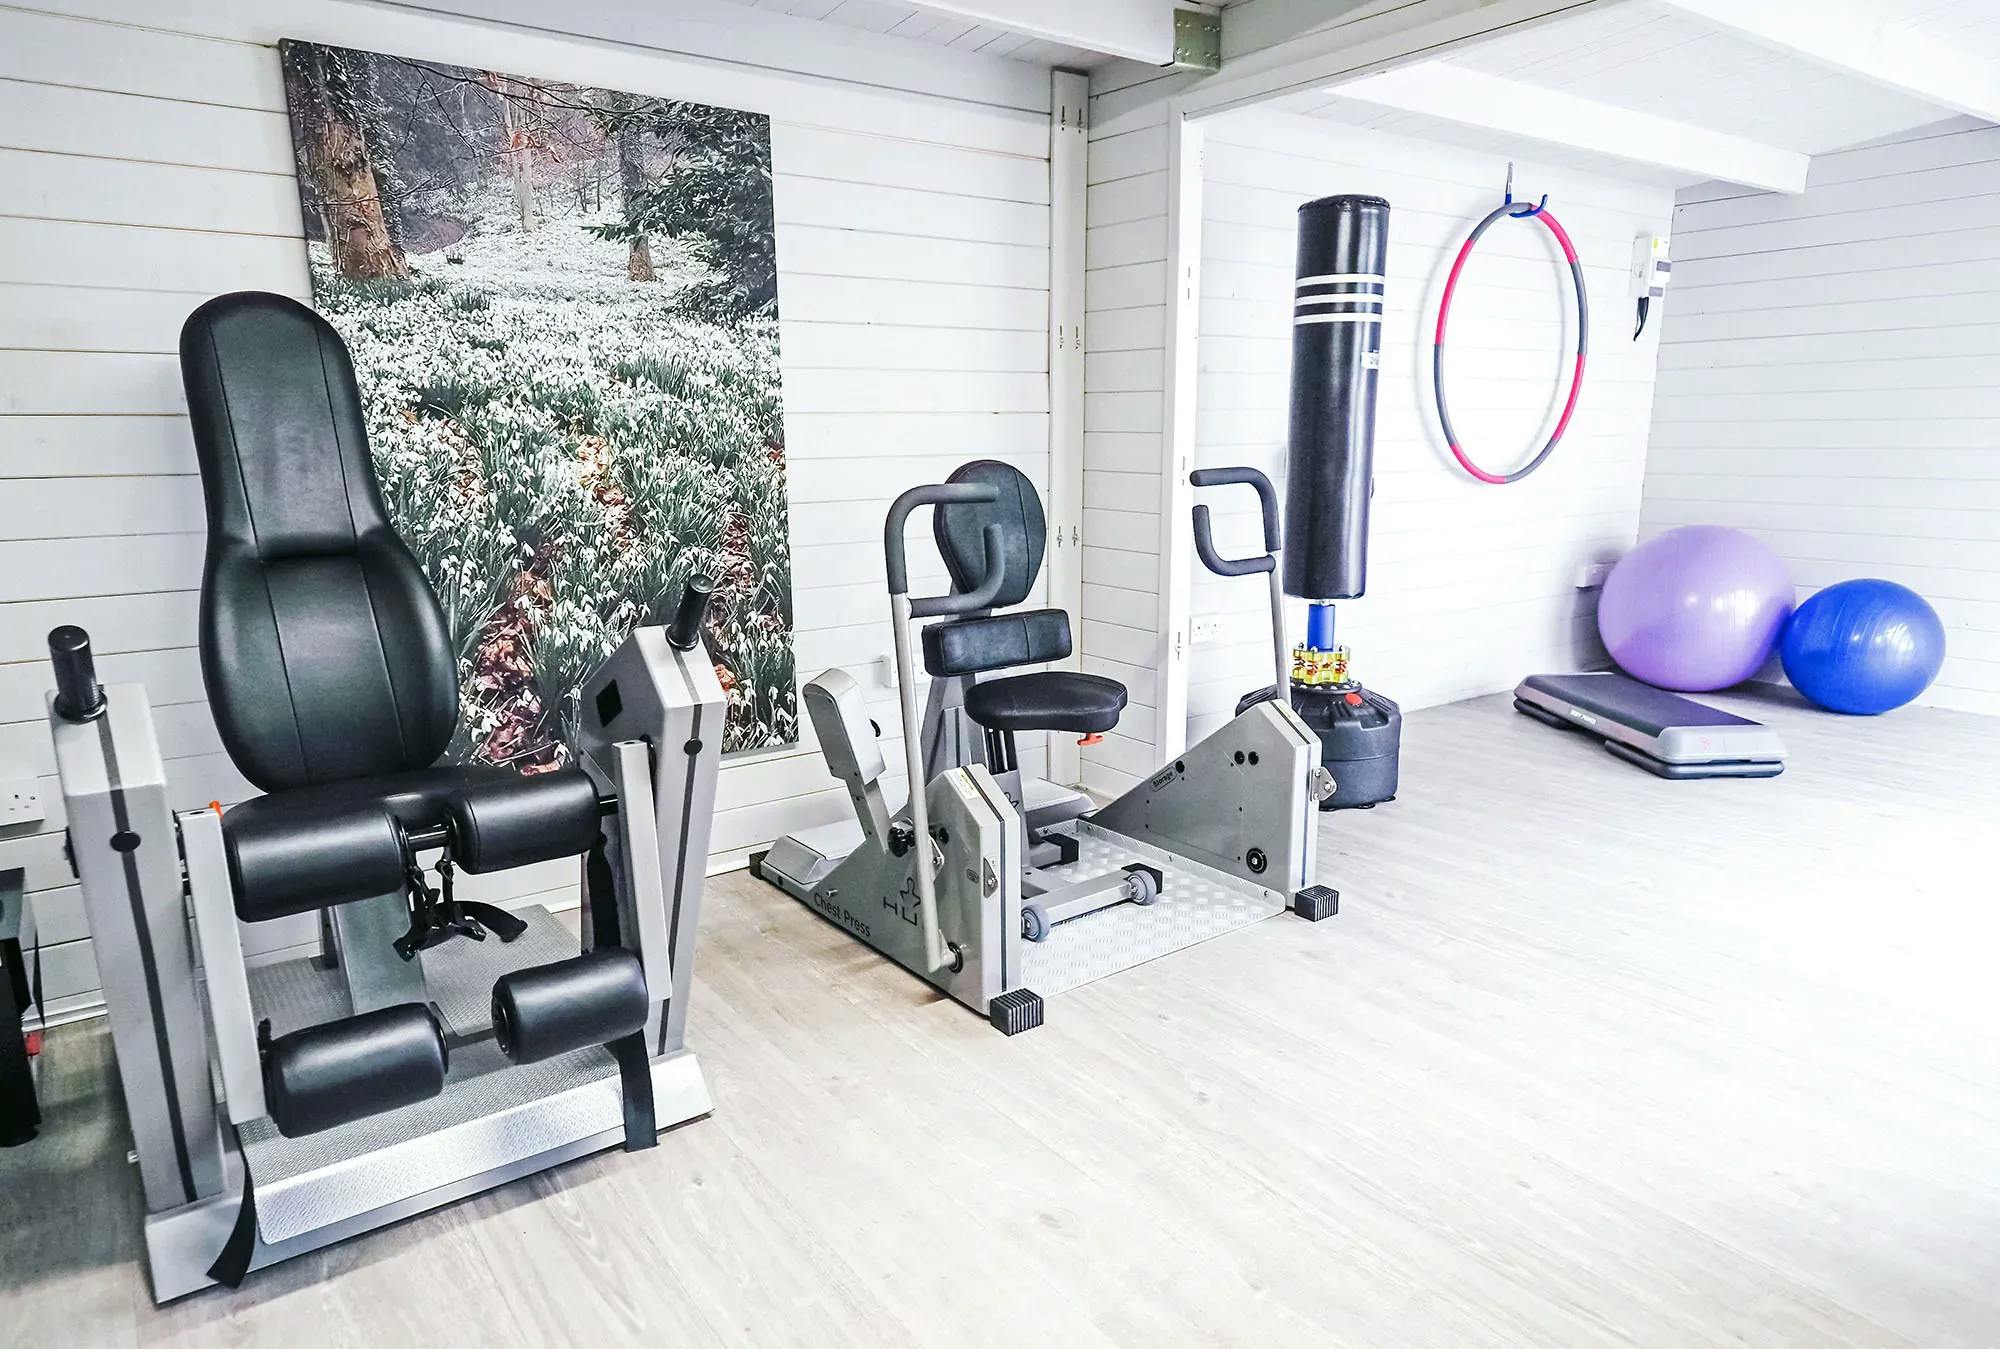 Gym at Bramley Court Care Home in Cambridge, Cambridgeshire